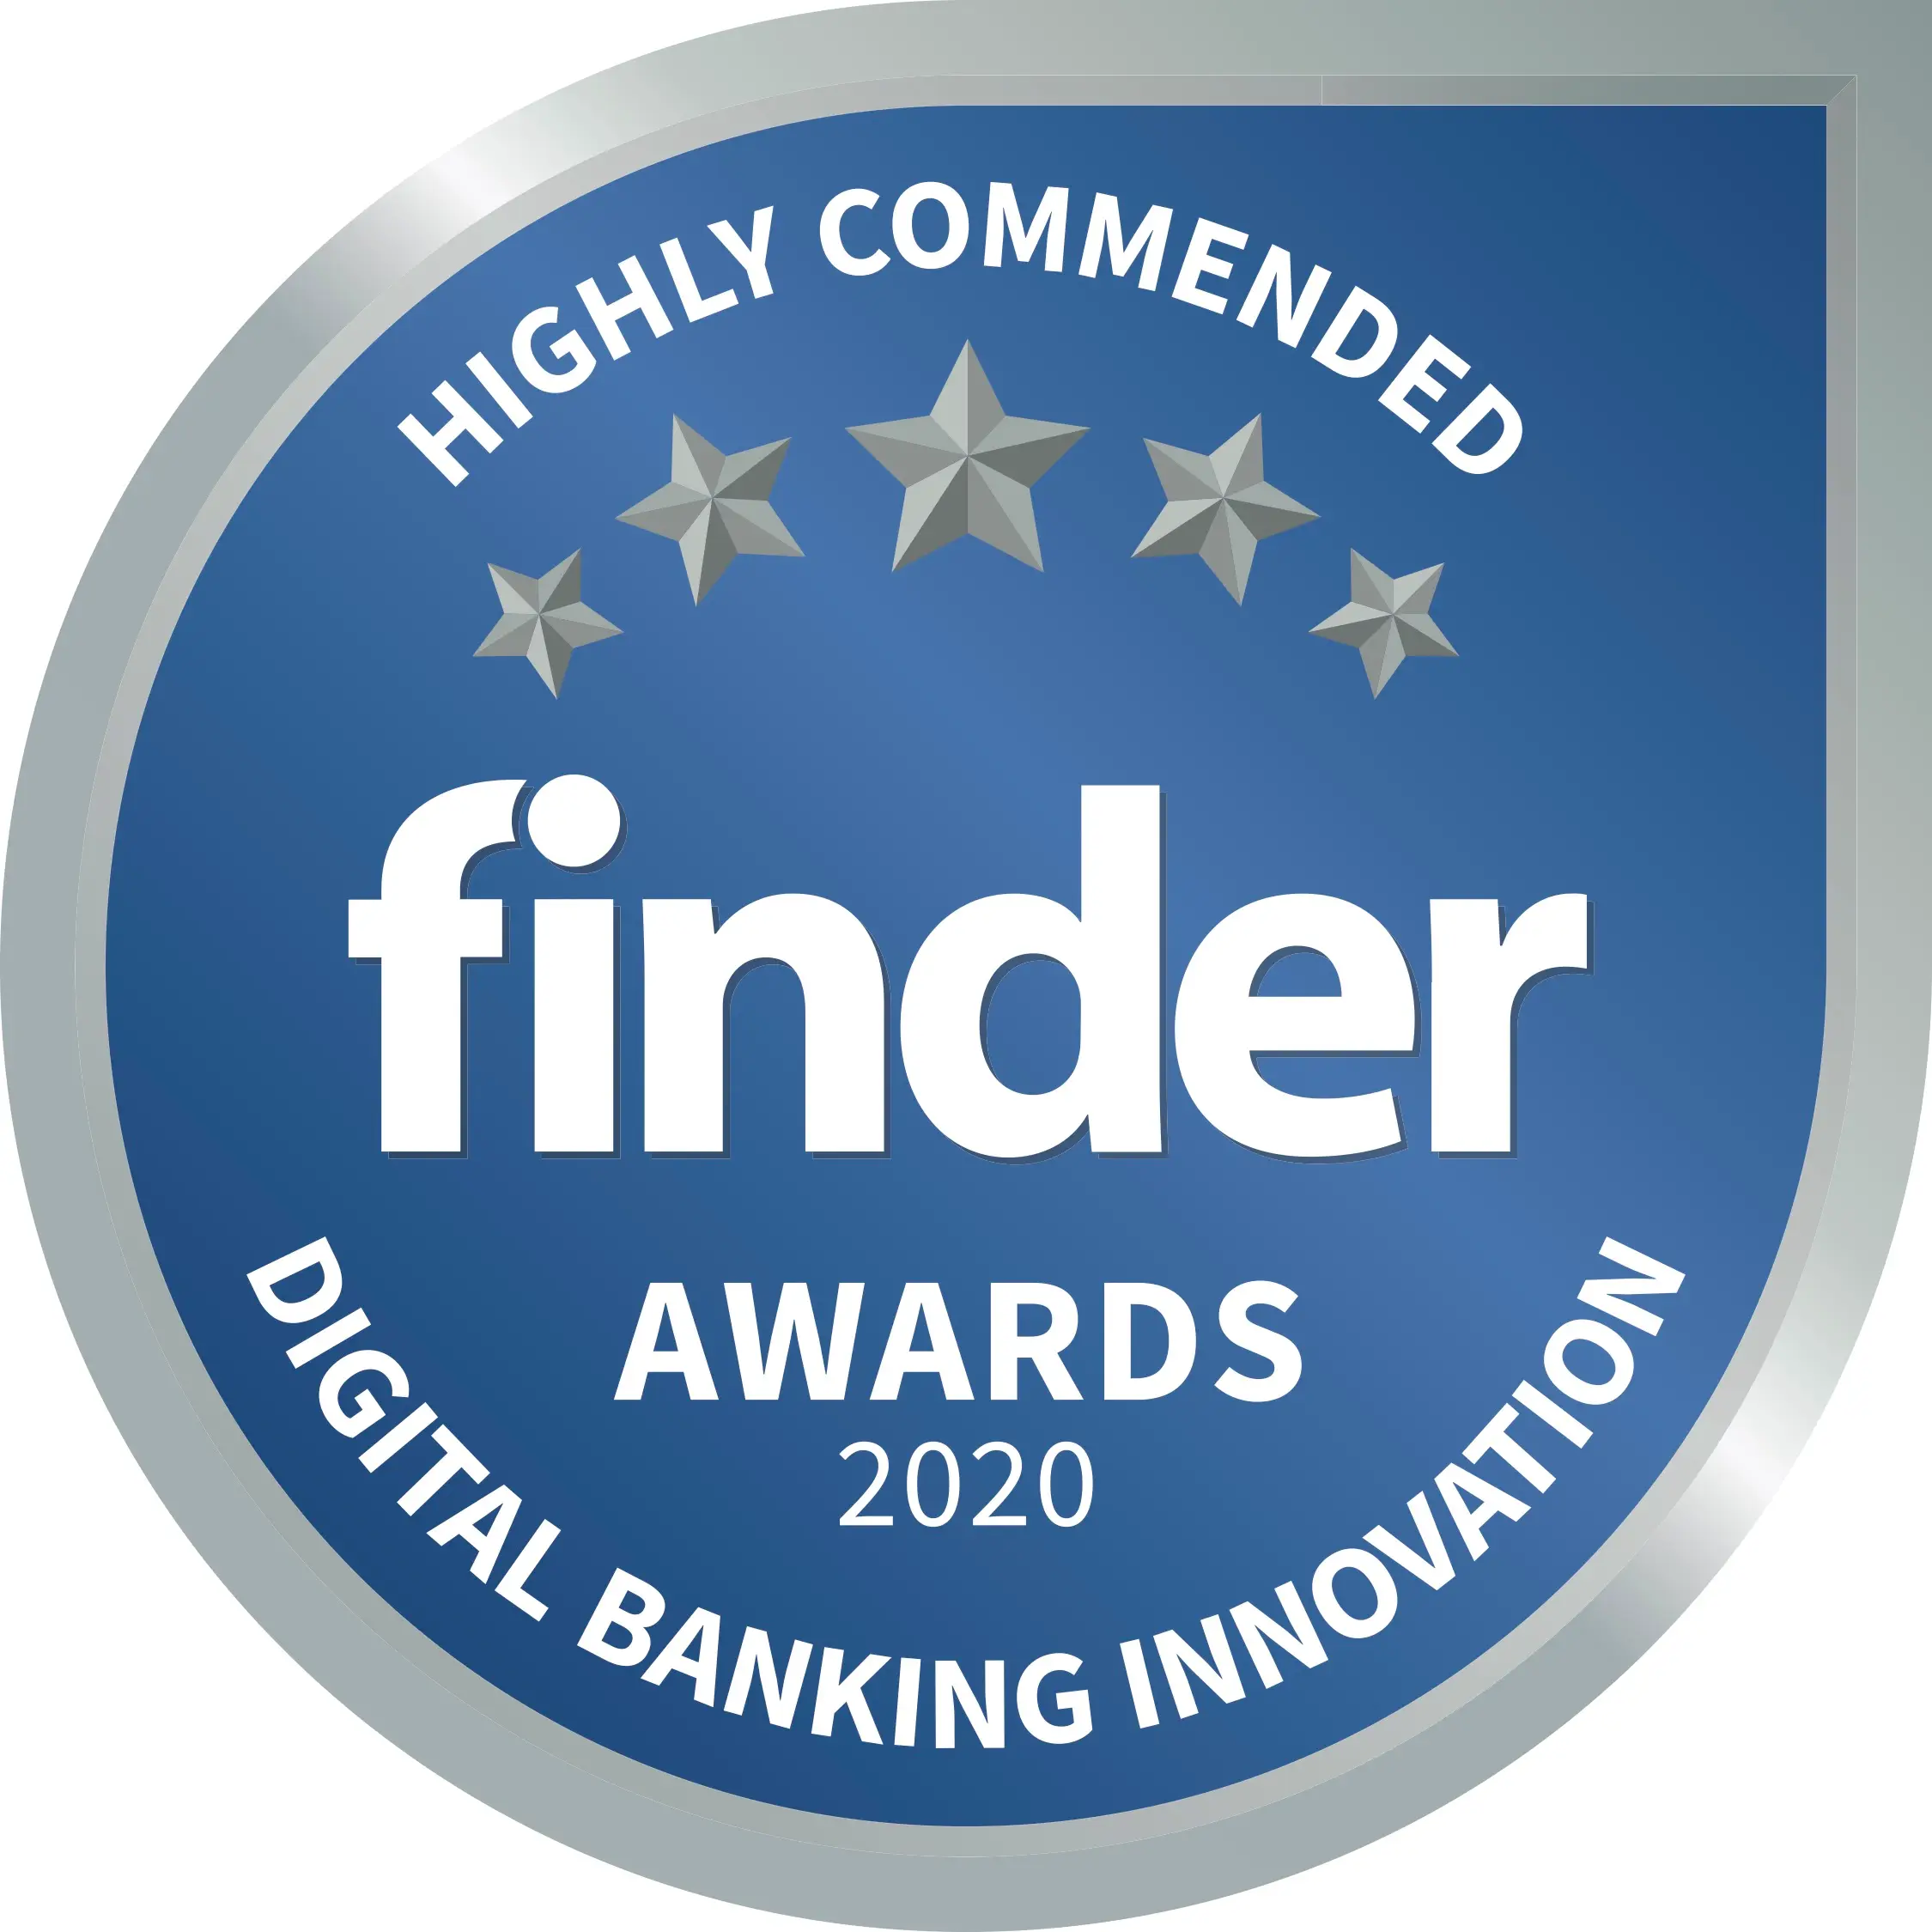 Highly commended High Street Bank Innovation